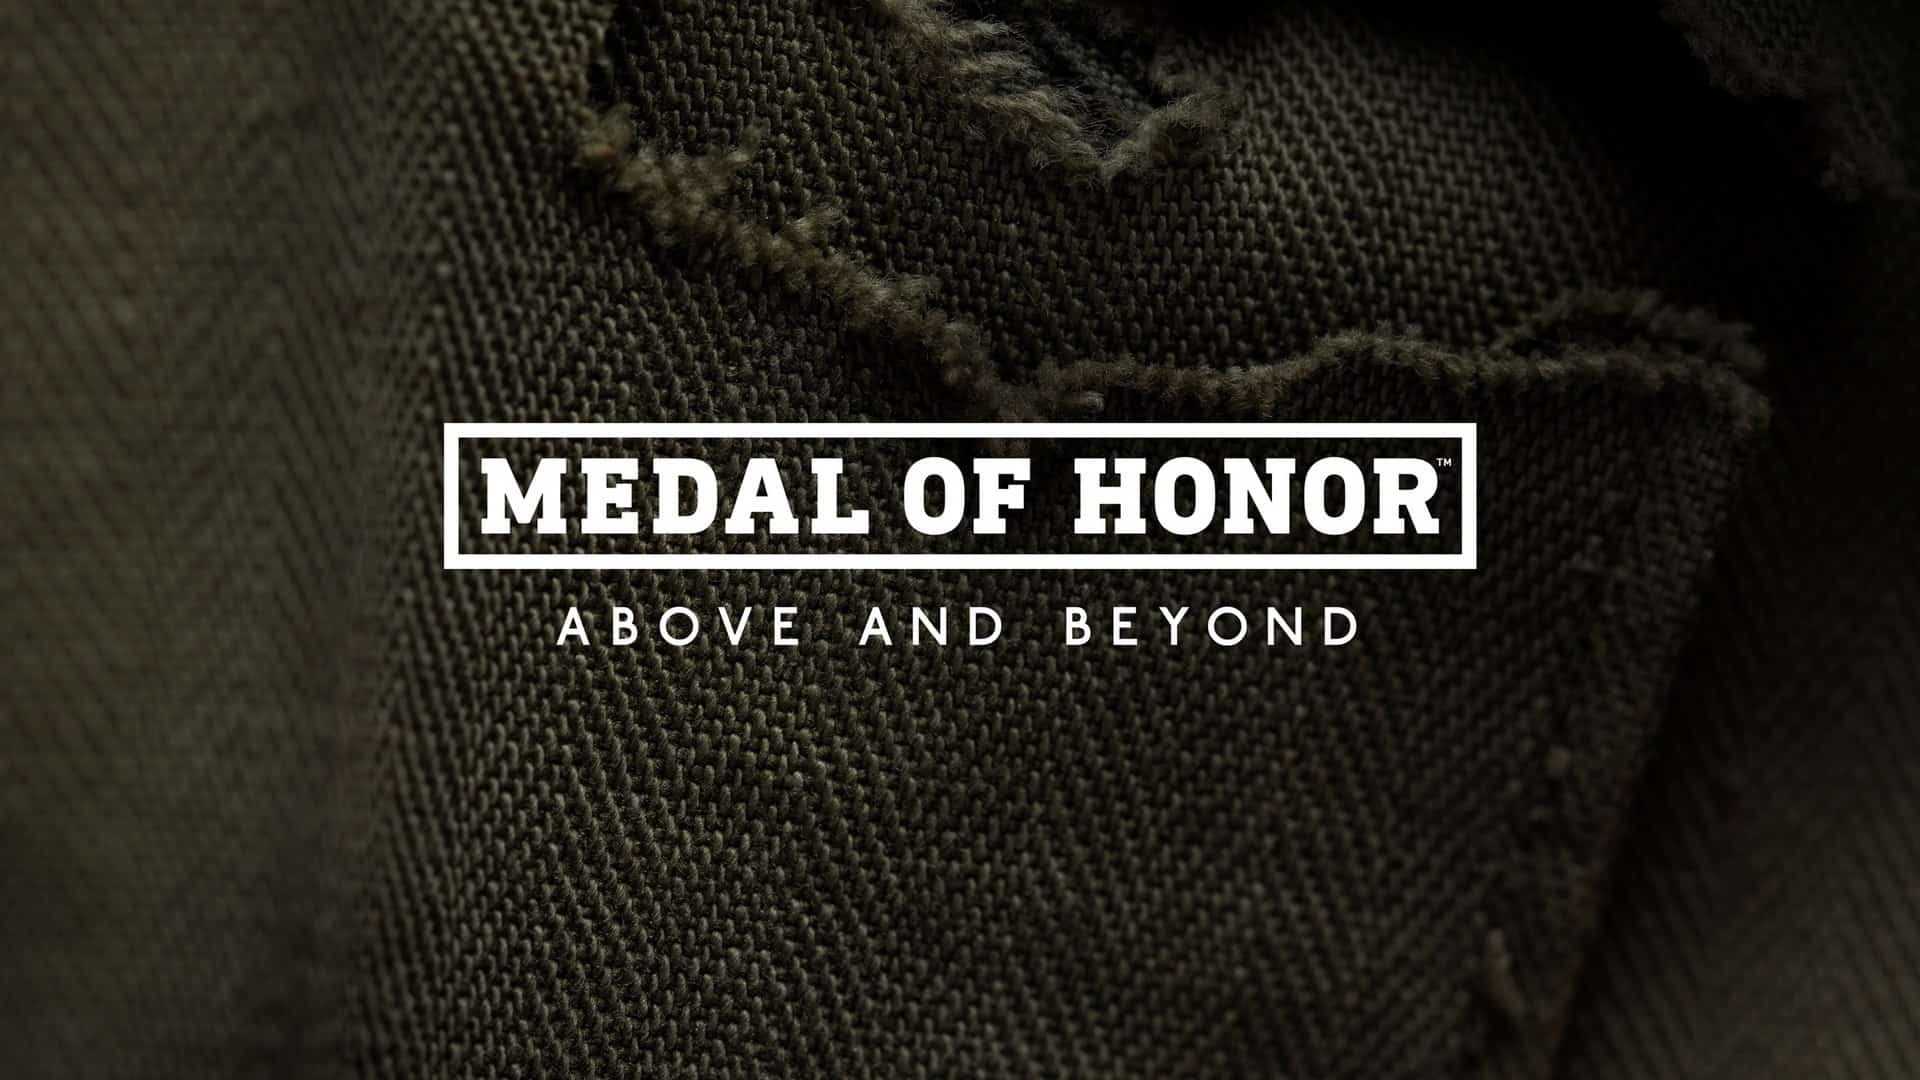 Medal Of Honor: Above And Beyond, Coming Exclusively For VR On Oculus Rift